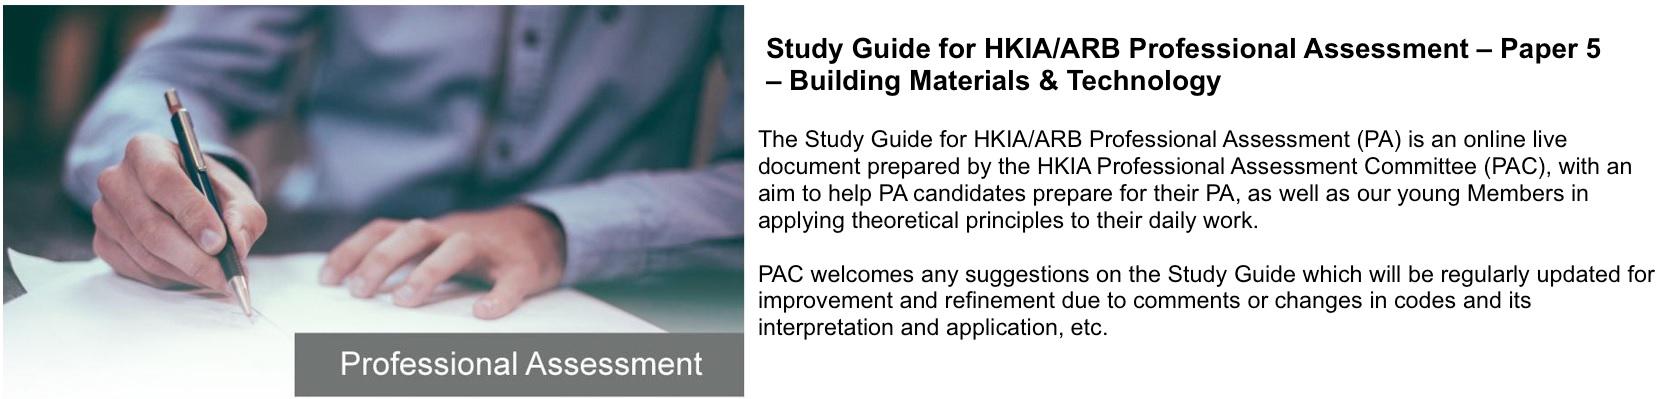 Study Guide for HKIA/ARB Professional Assessment Paper 2